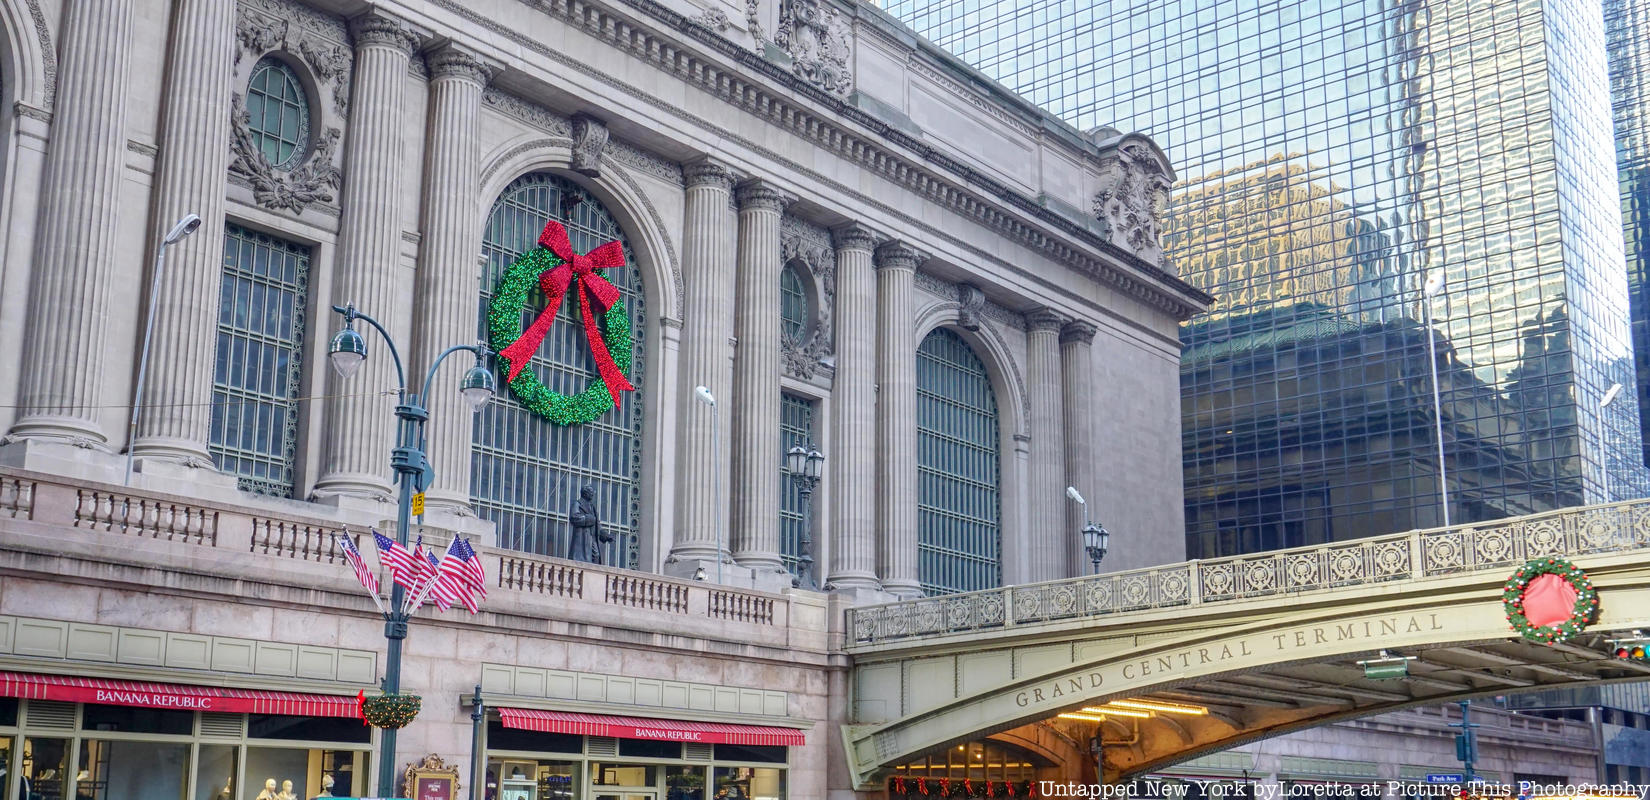 A large wreath glow on the front of Grand Central Terminal